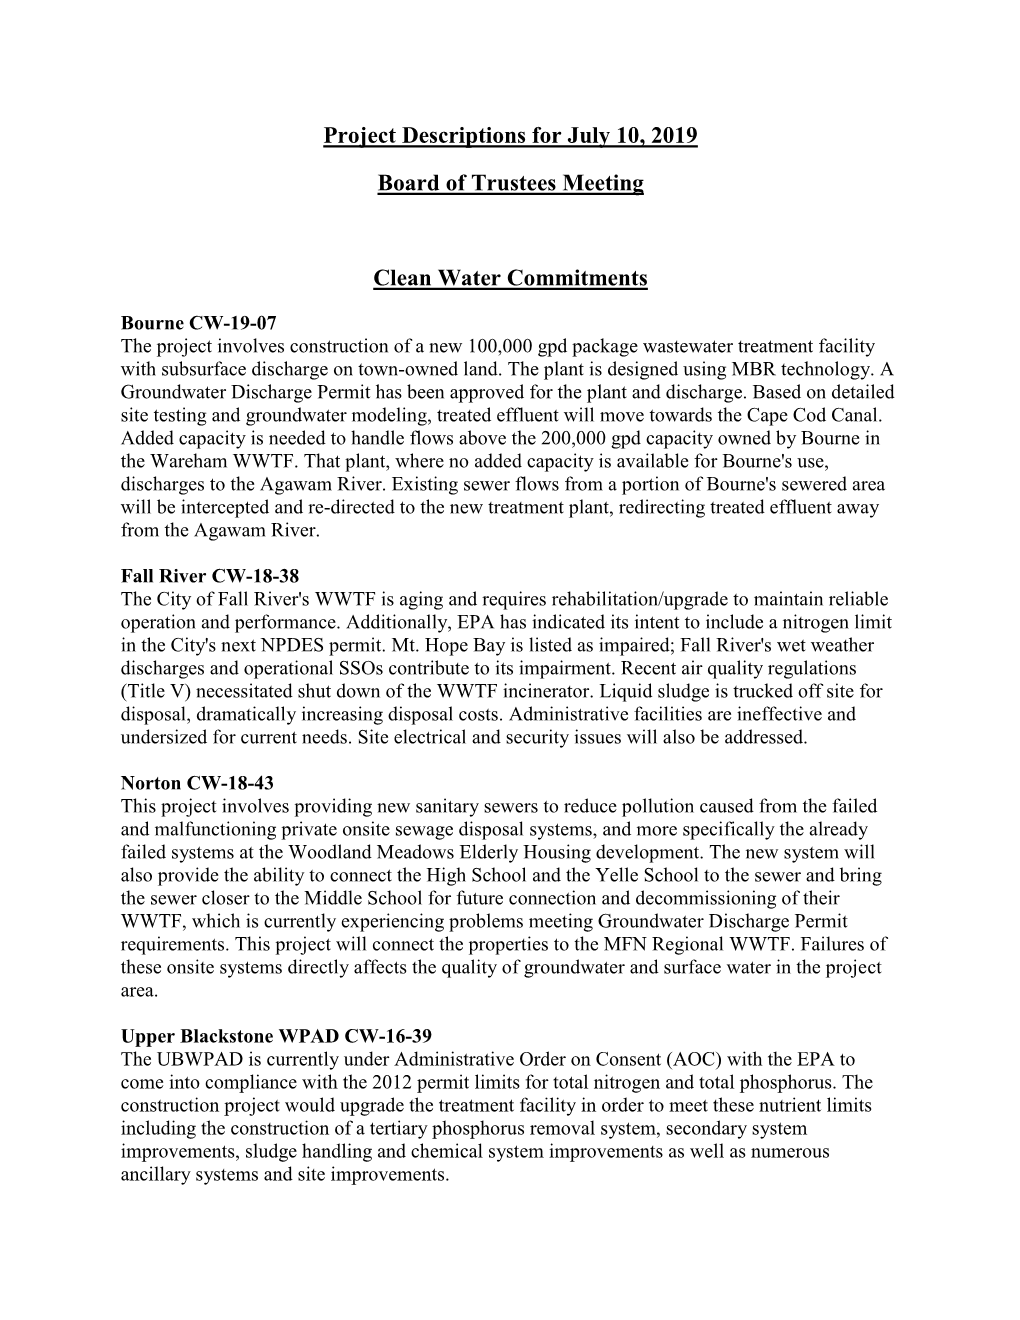 Project Descriptions for July 10, 2019 Board of Trustees Meeting Clean